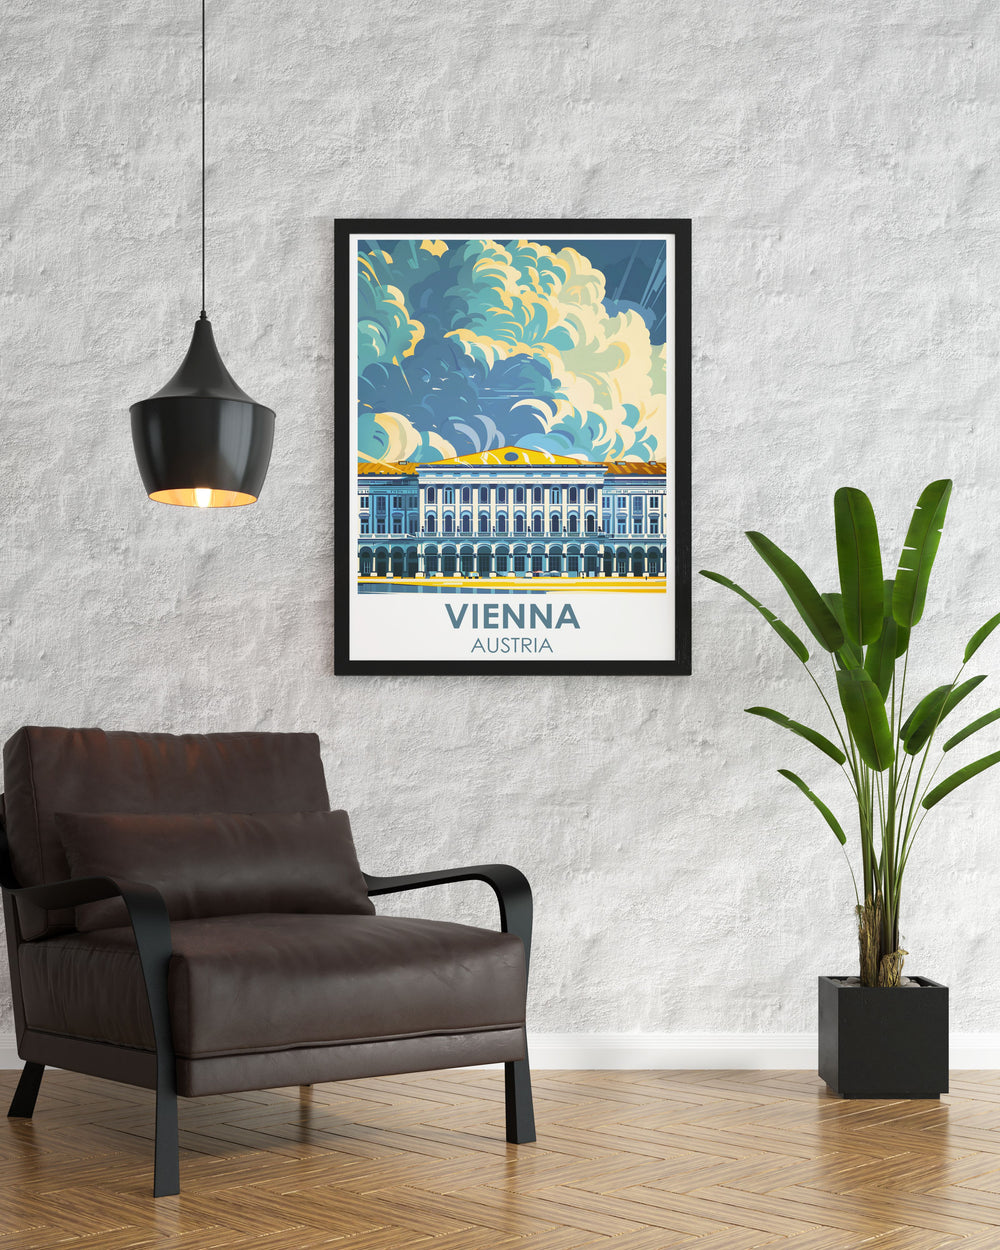 Captivating Vienna Poster featuring the historic schonbrunn palace an ideal piece of wall art to celebrate the beauty of Vienna and its rich heritage suitable for various special occasions